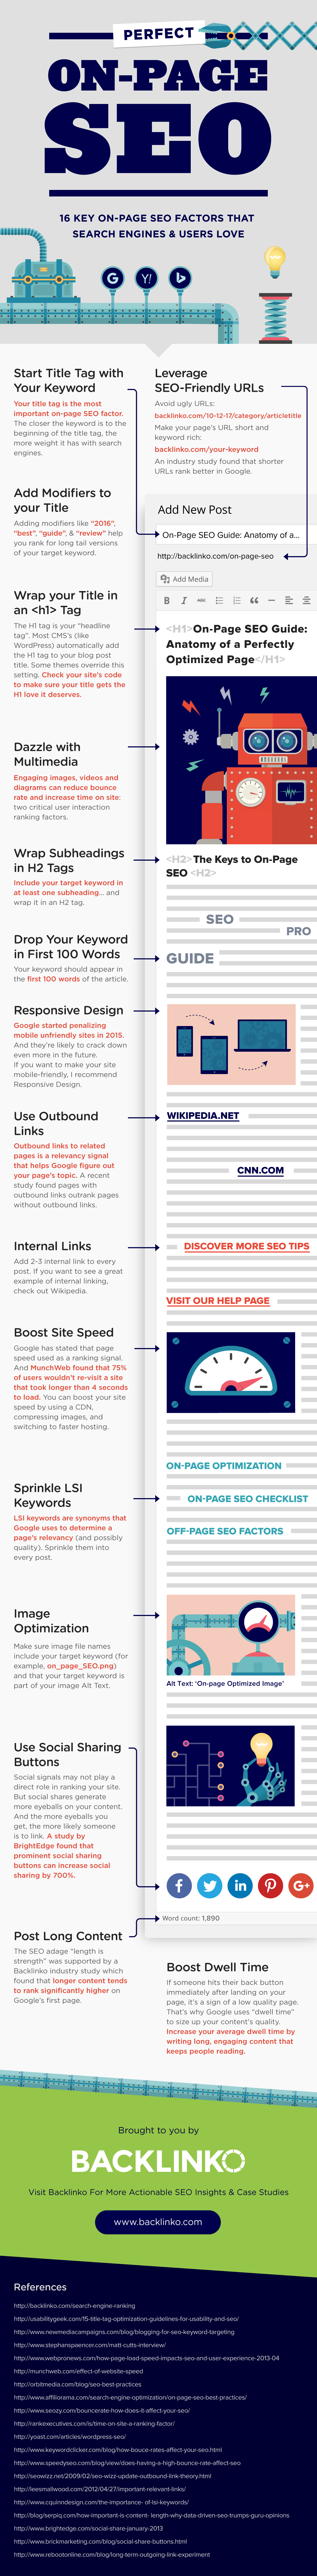 on-page-seo-infographic